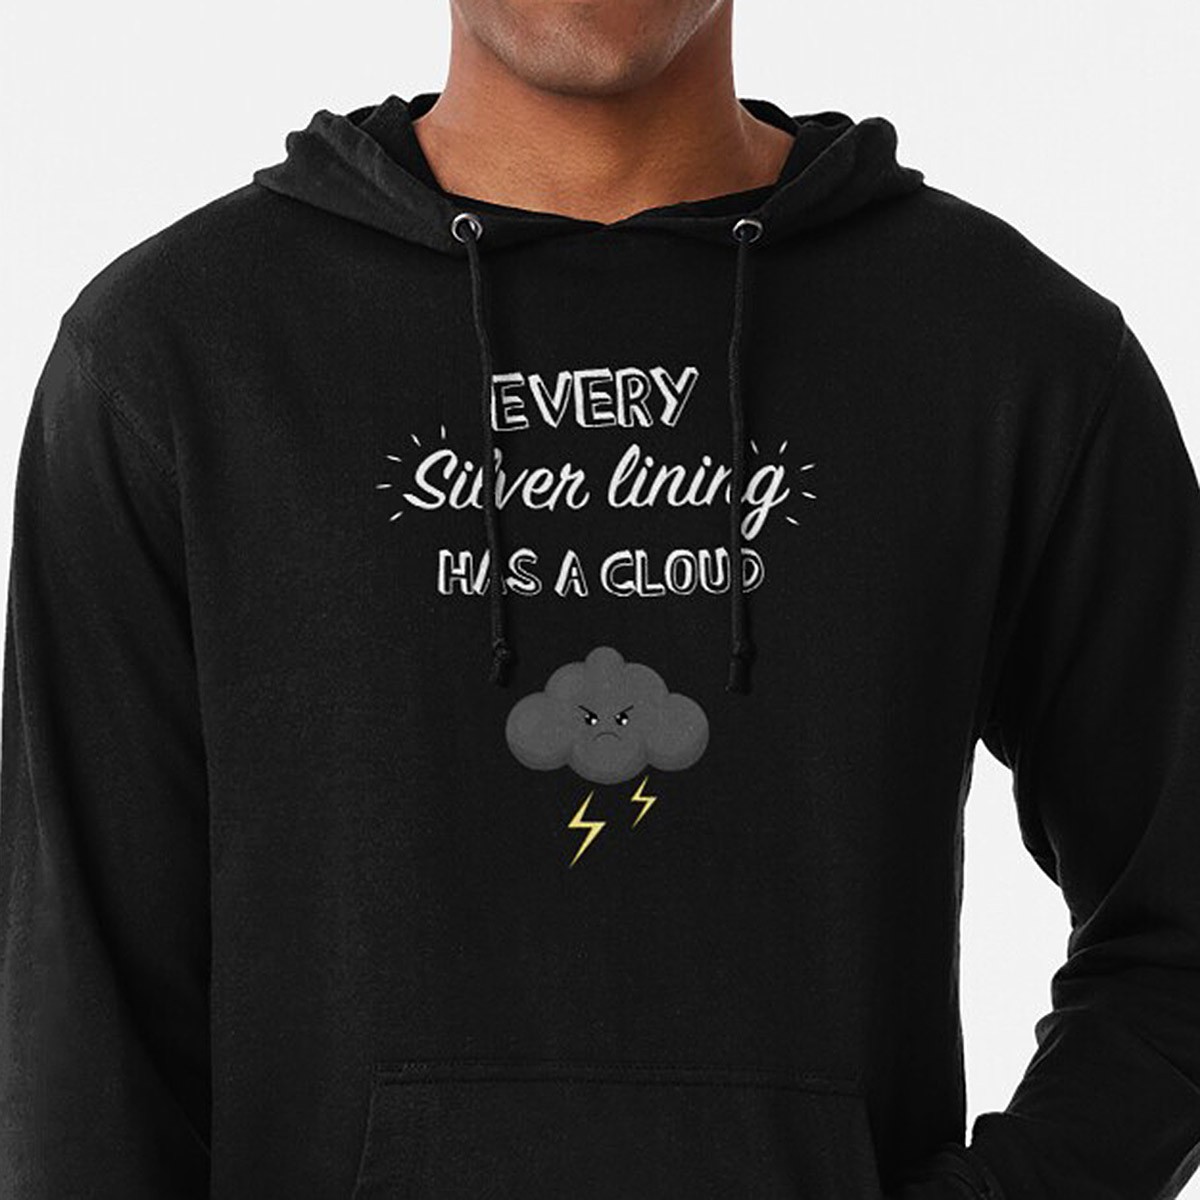 Every silver lining has a cloud - lightweight hoodie by NTK Apparel